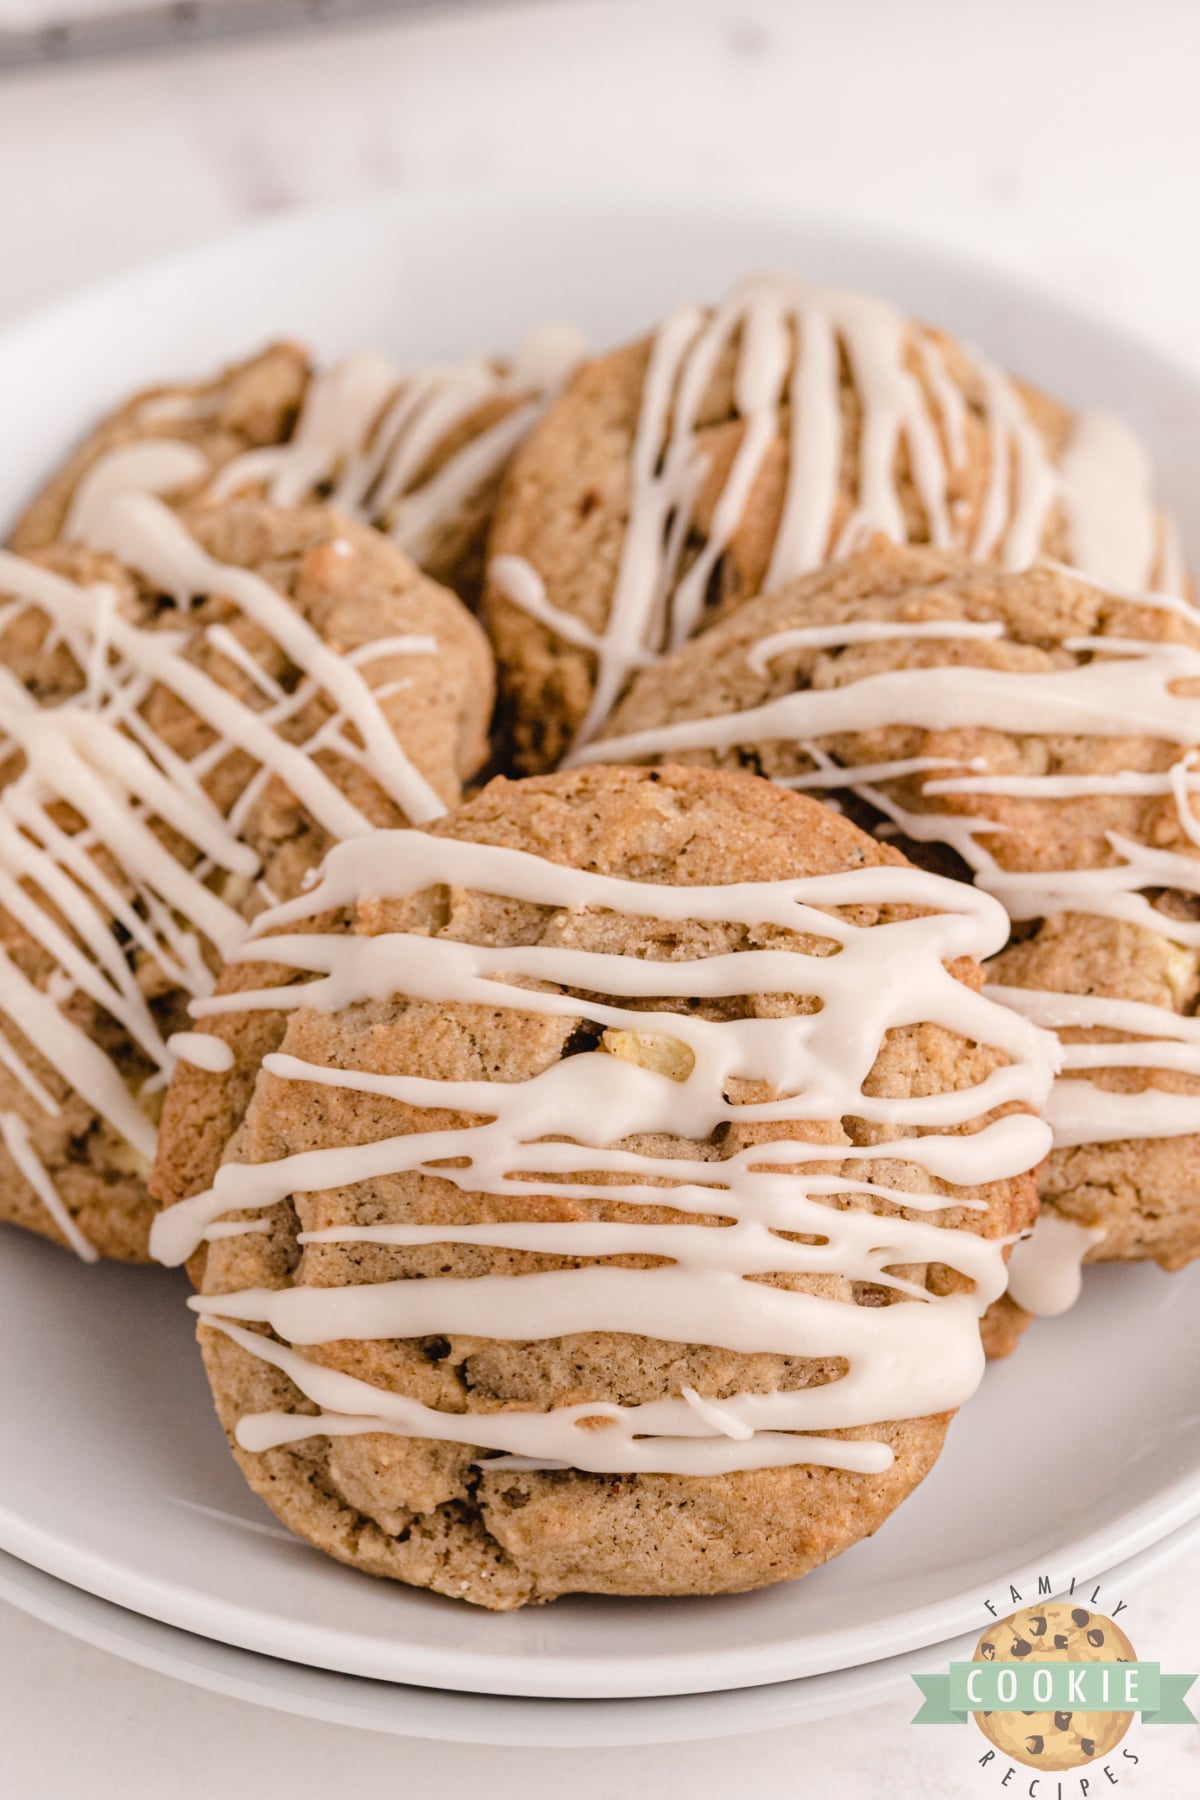 Vanilla Glazed Spiced Apple Cookies made with lots of spices, fresh apples and walnuts. Soft and chewy cookie recipe that is topped with a simple vanilla glaze.